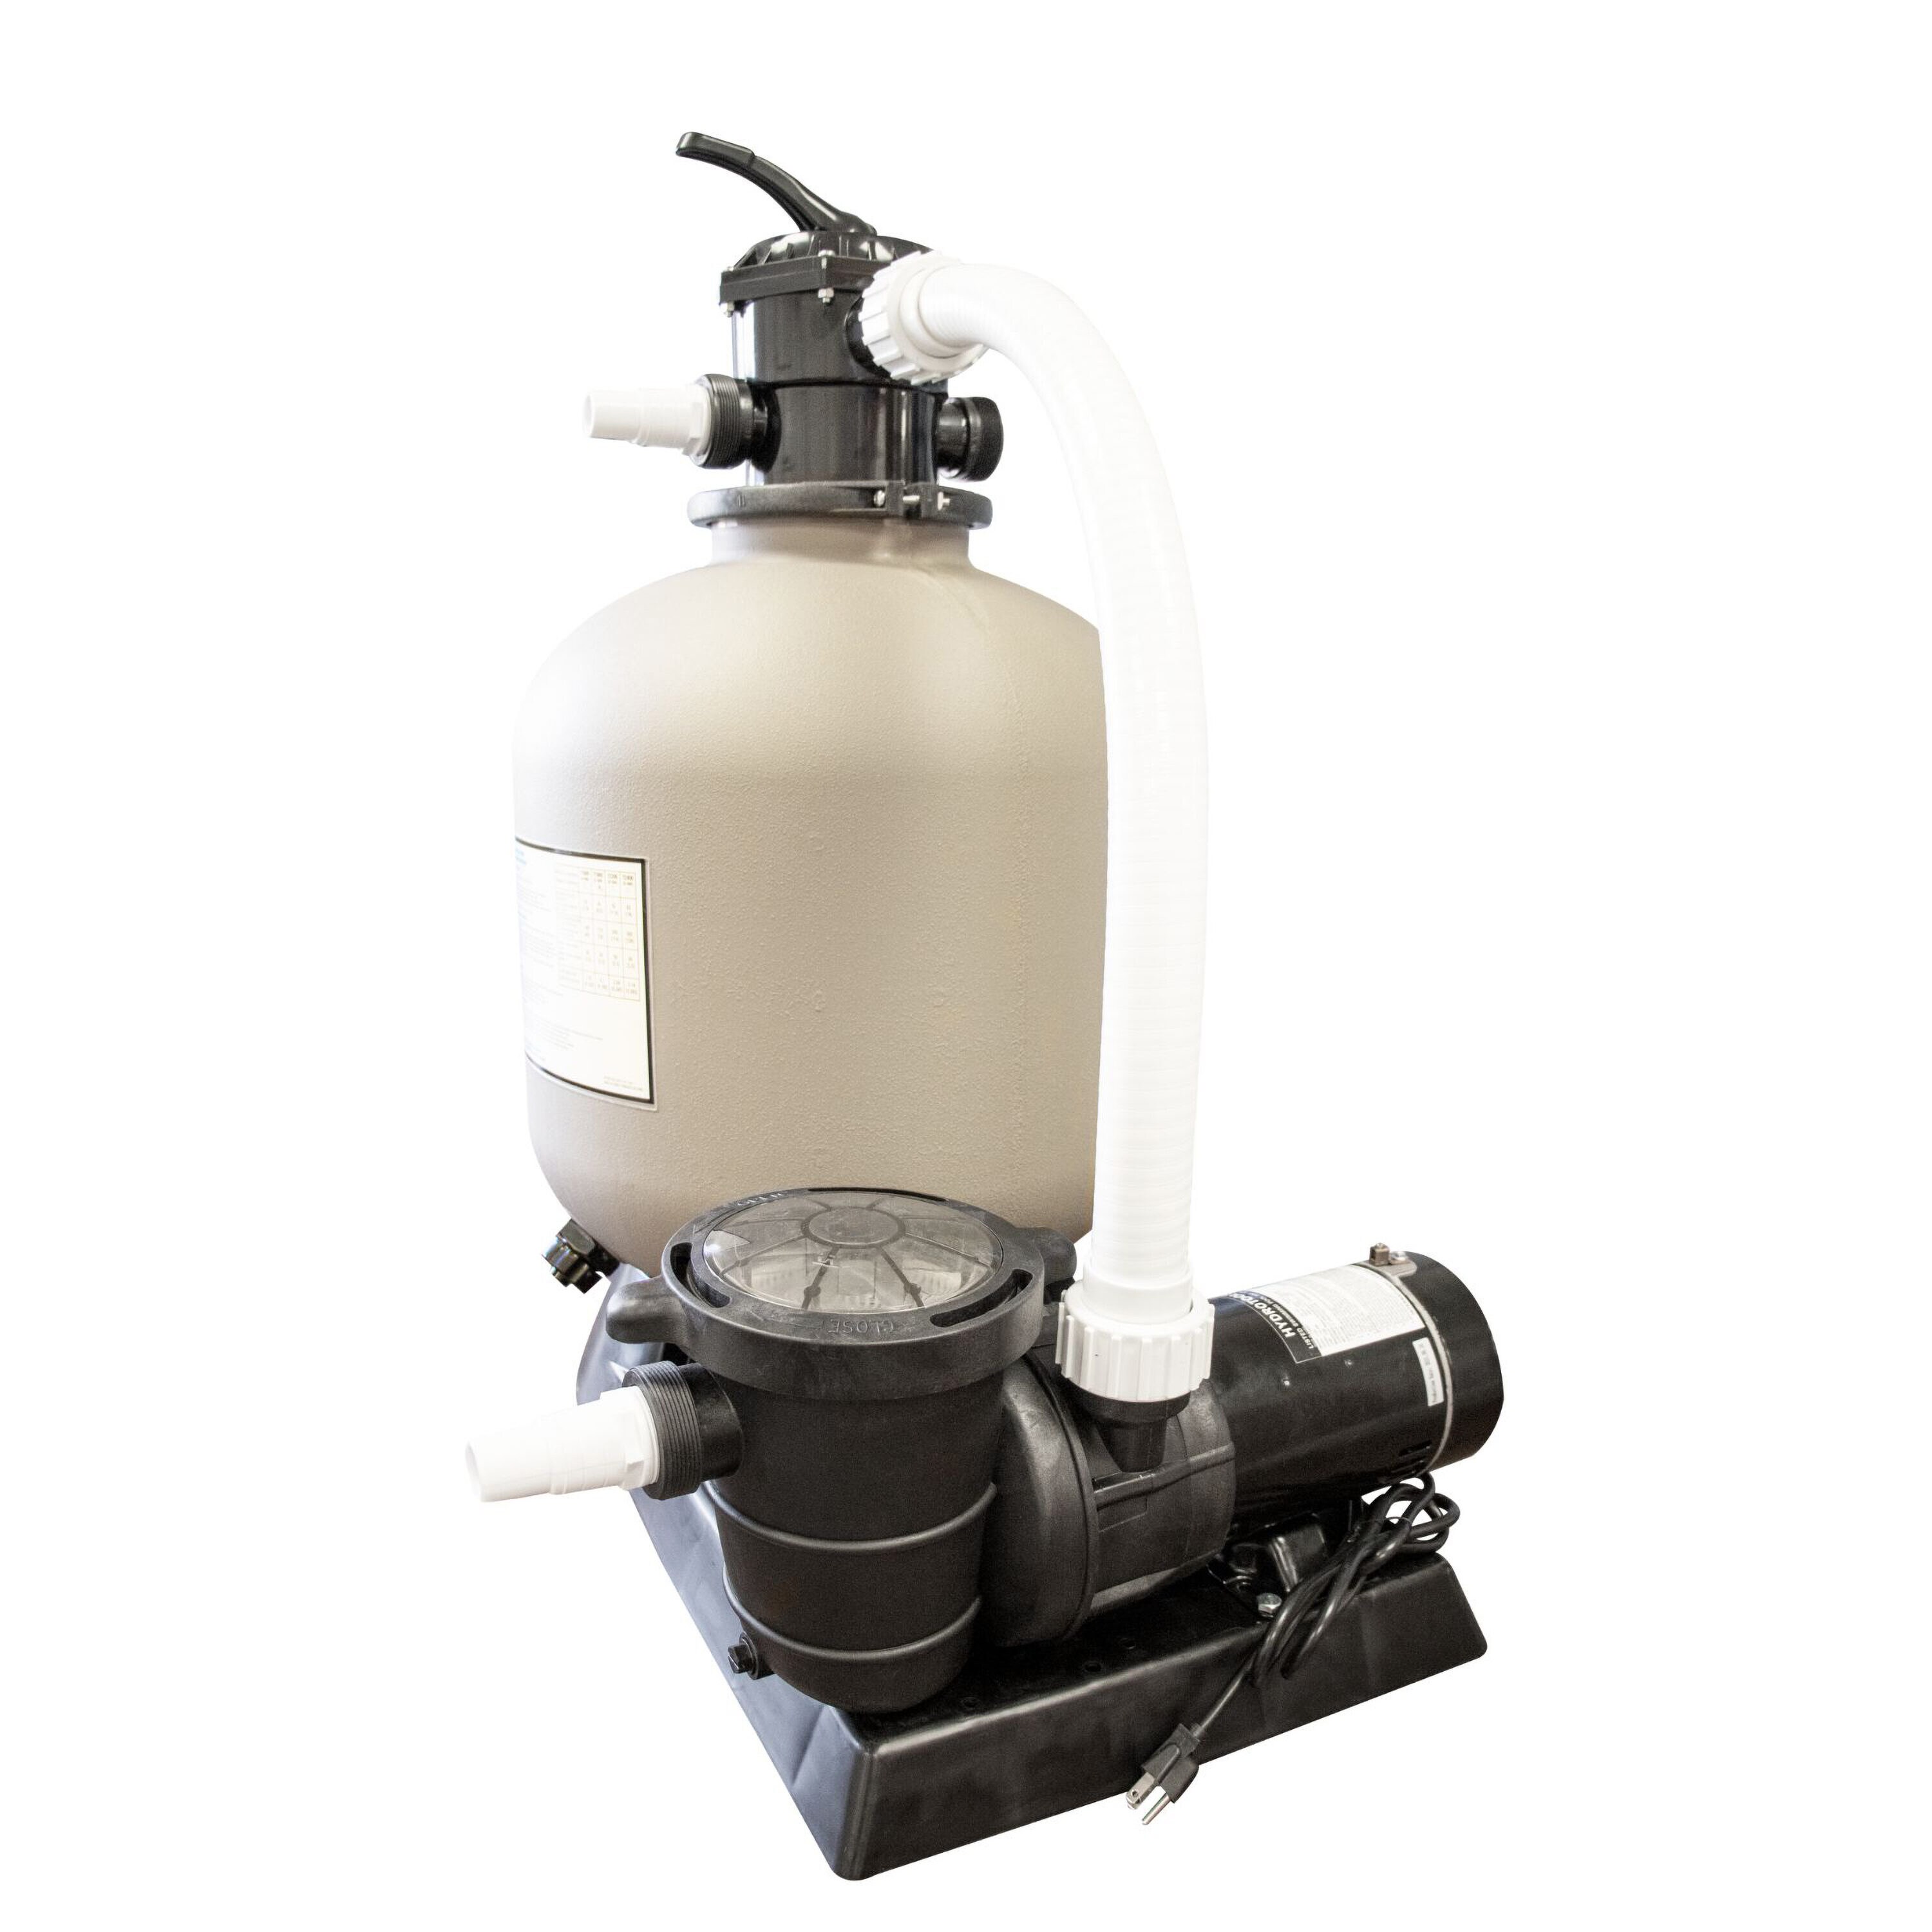 Swimline 19 FILTER TANK with 1-HP PUMP Sand Pool Filter System